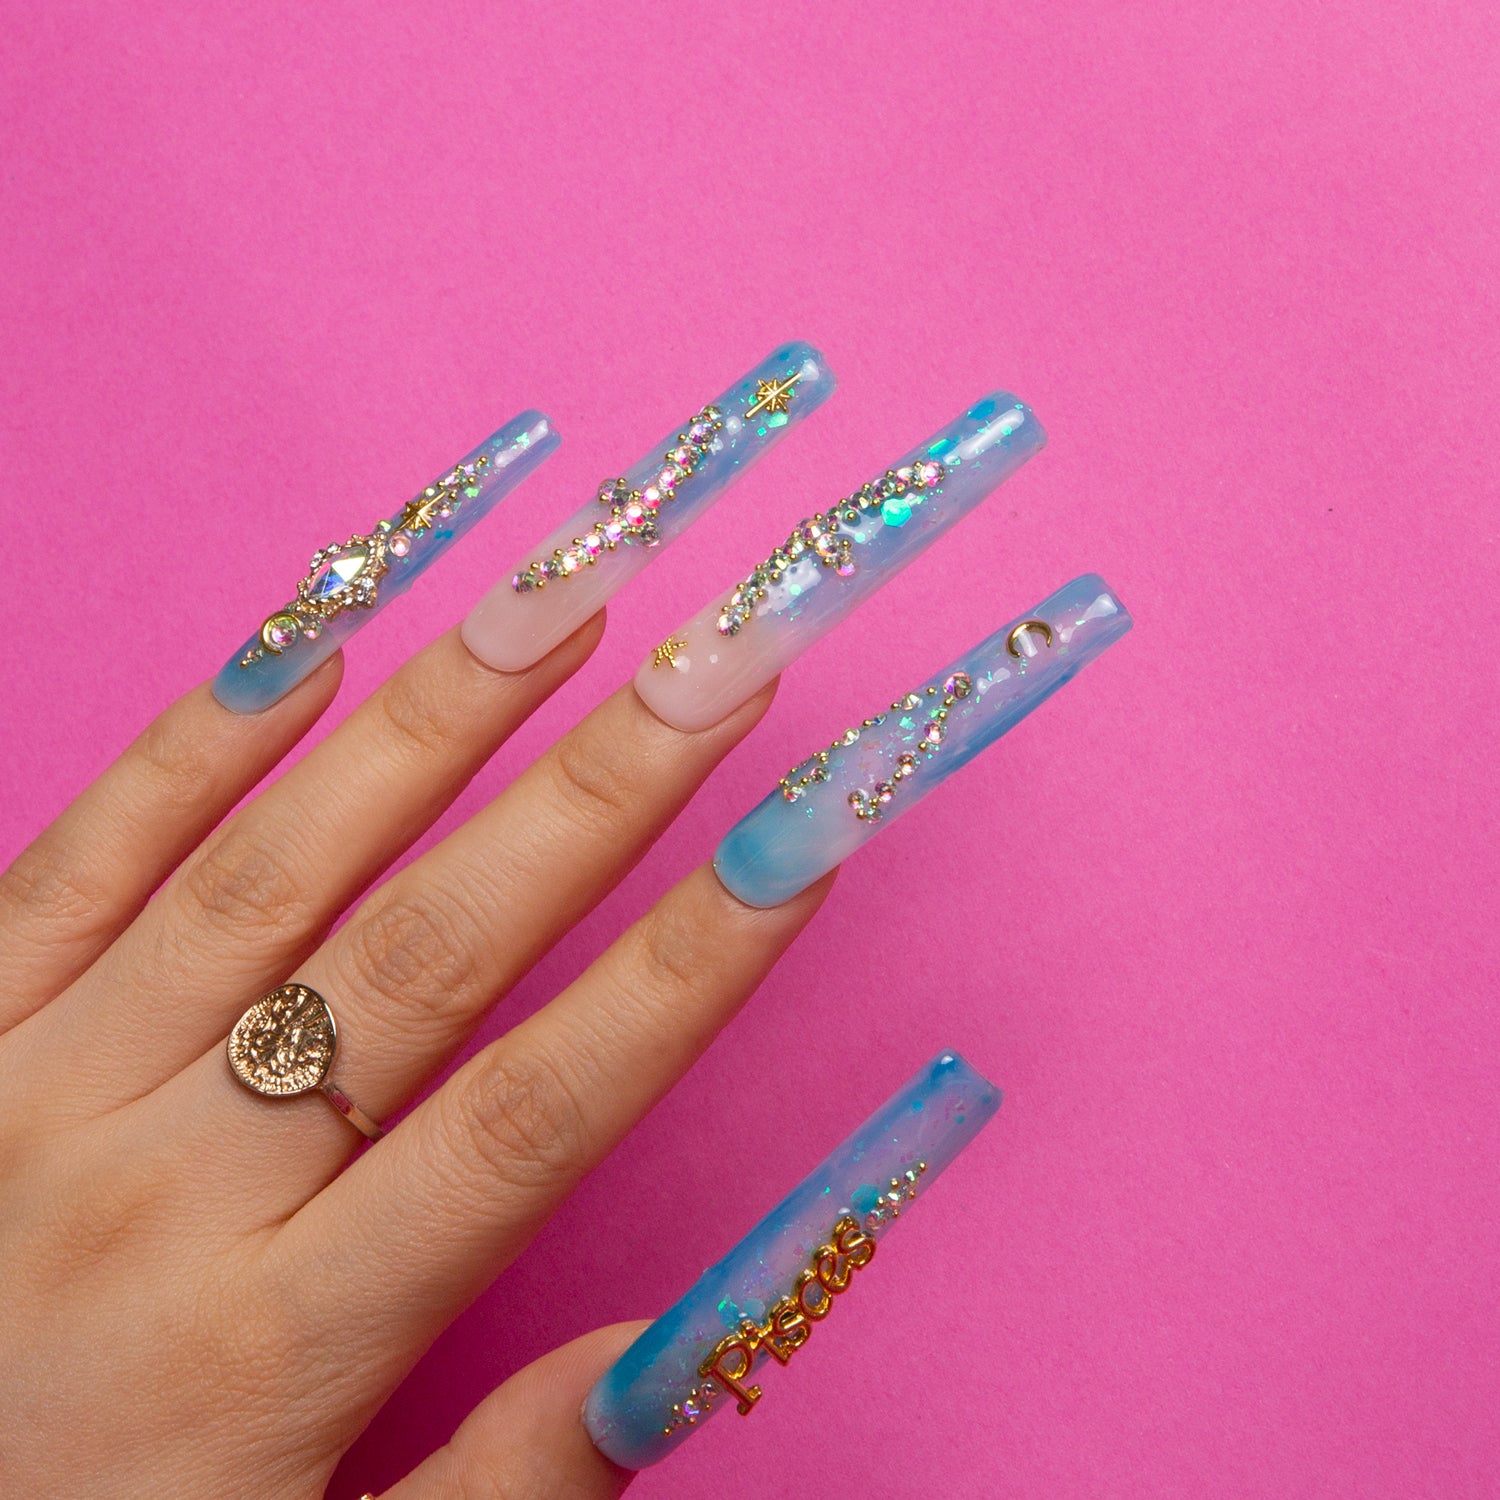 Pisces blue french tip Square nails H157 RTS